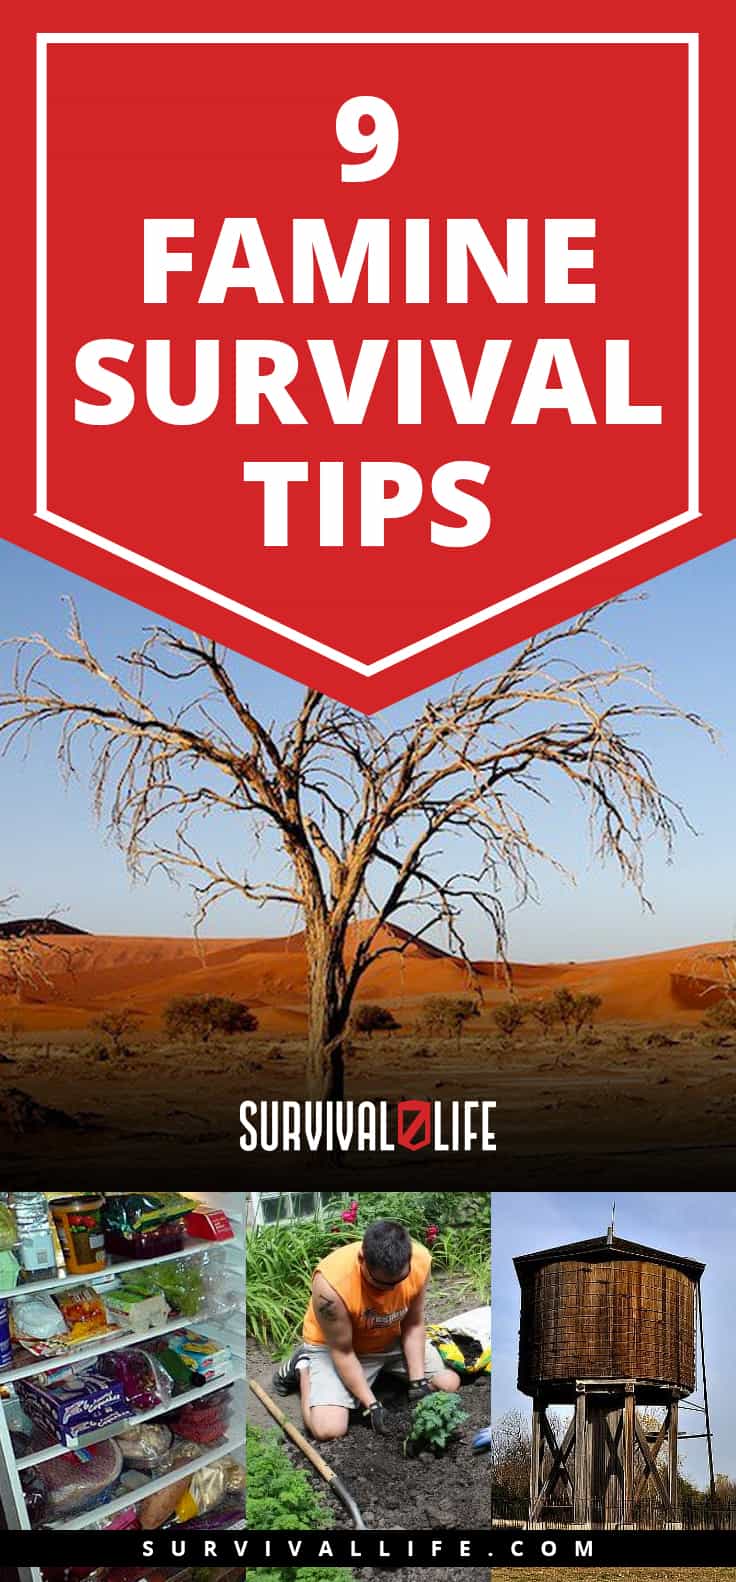 Famine Survival Tips: How To Survive Food Shortage | https://survivallife.com/famine-survival-tips/